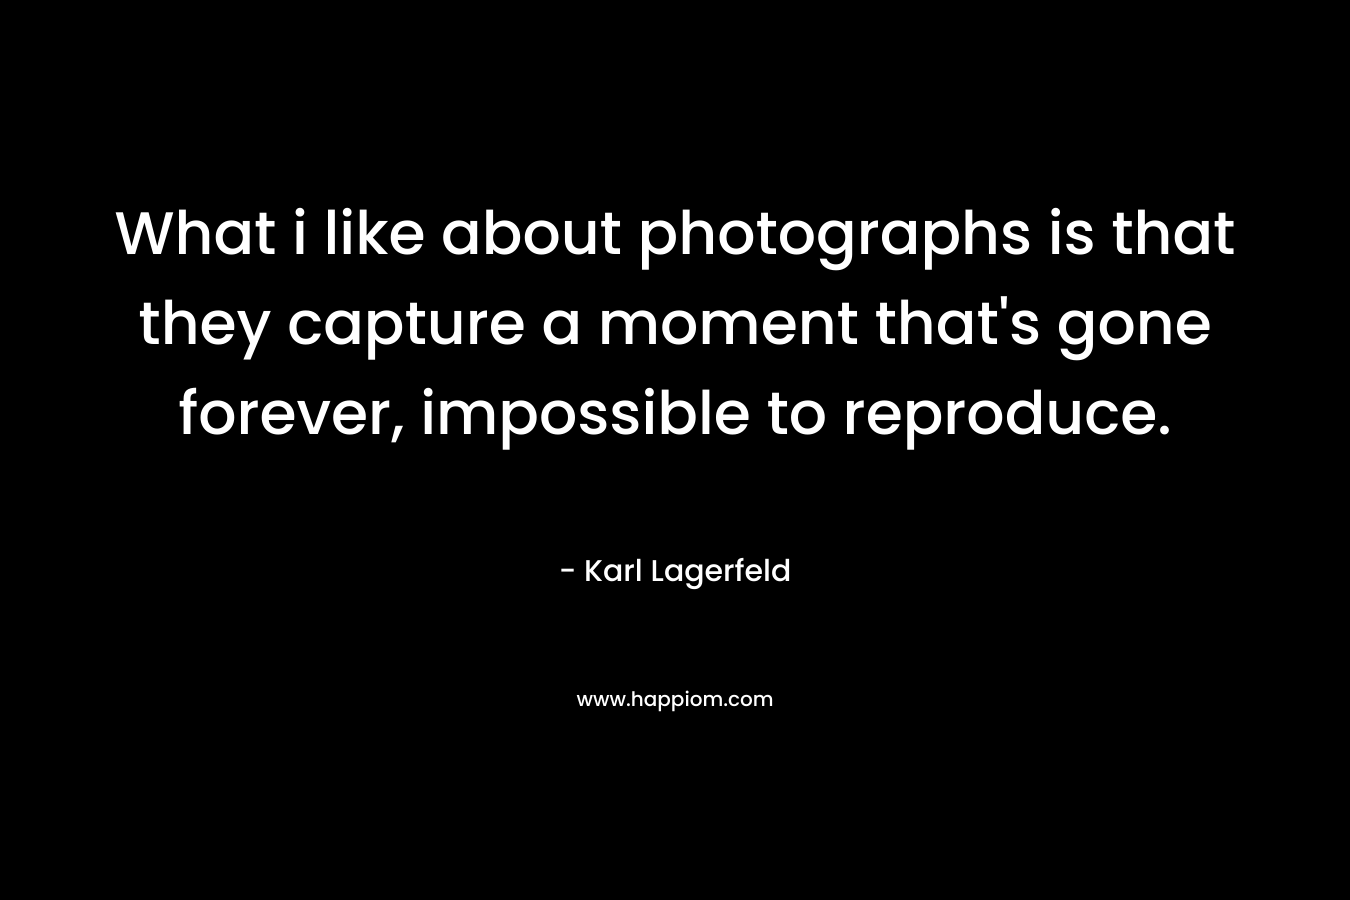 What i like about photographs is that they capture a moment that’s gone forever, impossible to reproduce. – Karl Lagerfeld